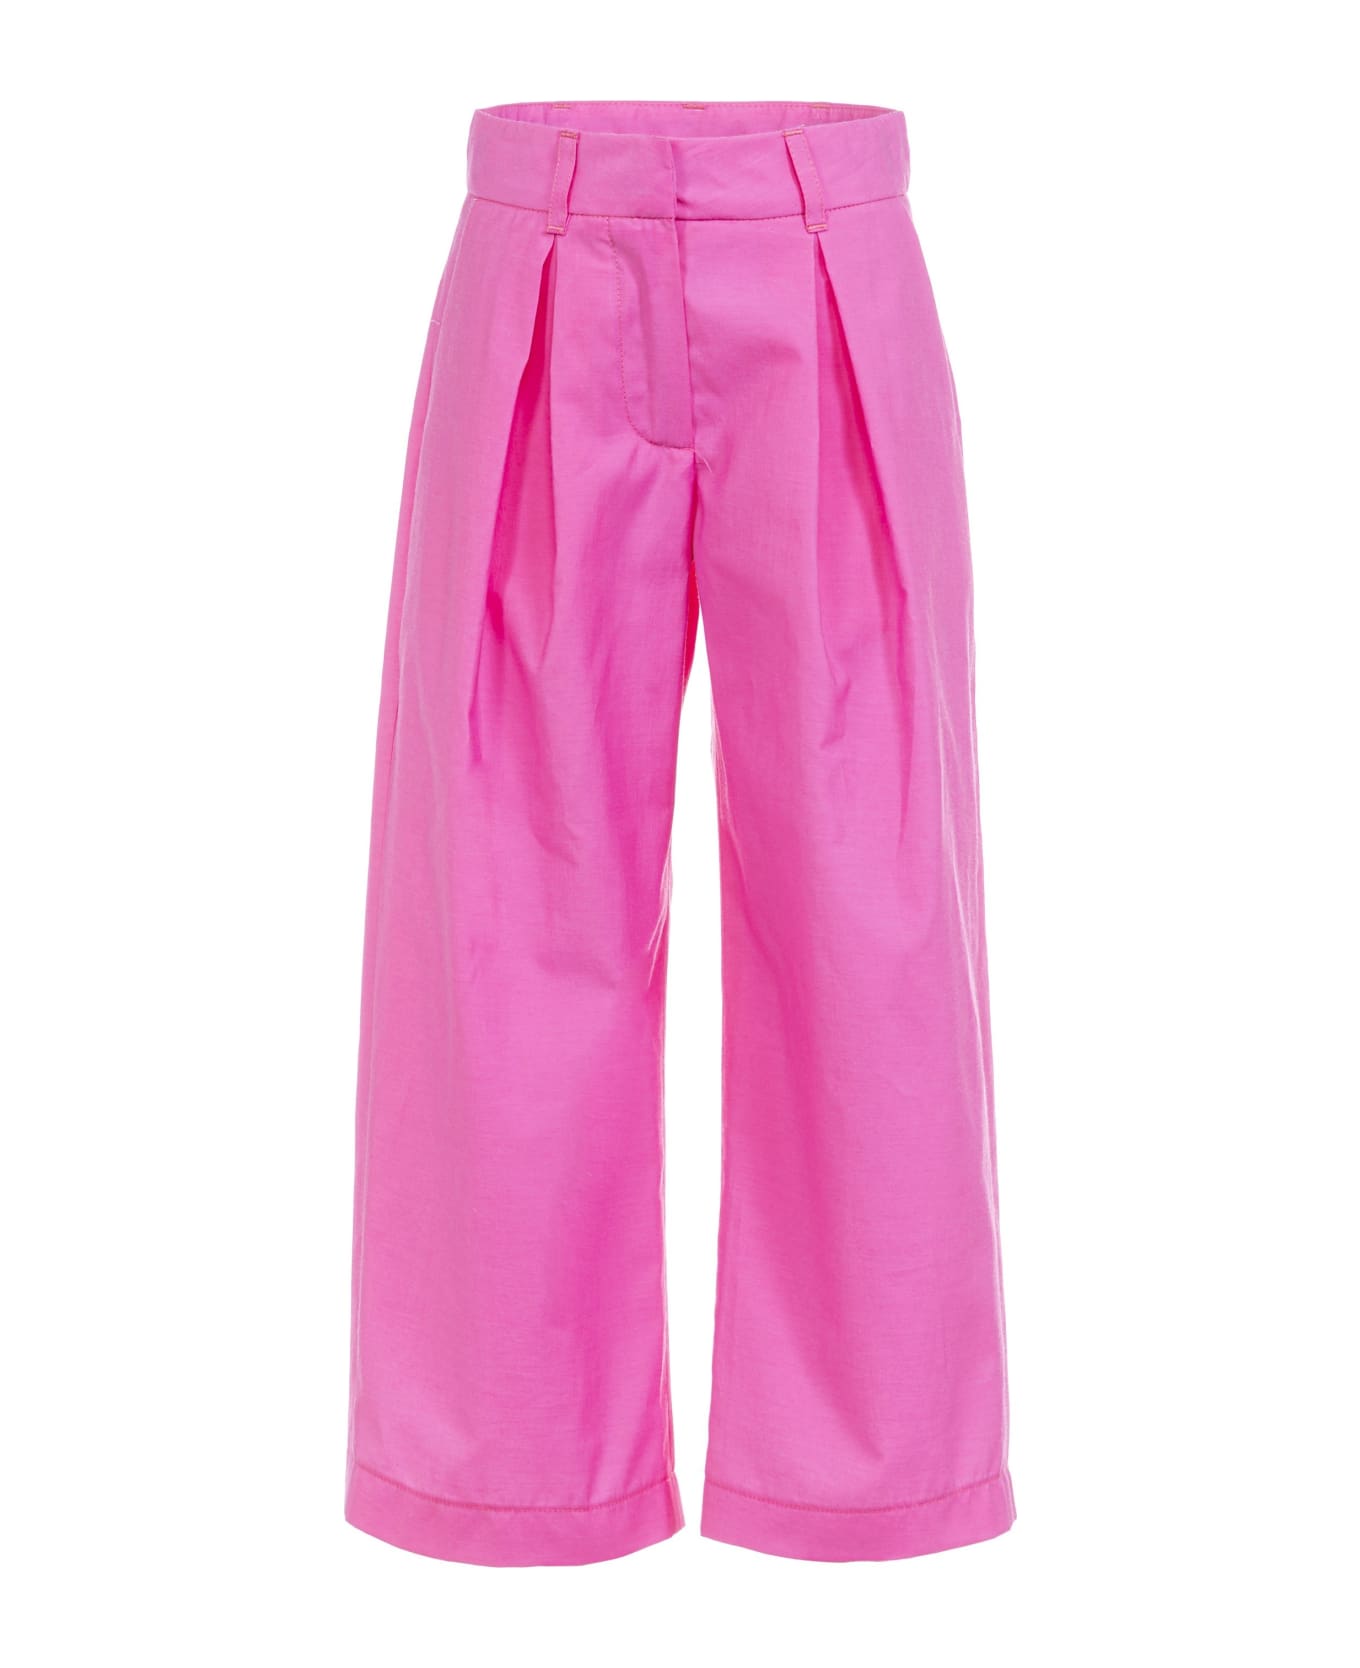 Pucci High Waisted Trousers - Fucsia ボトムス